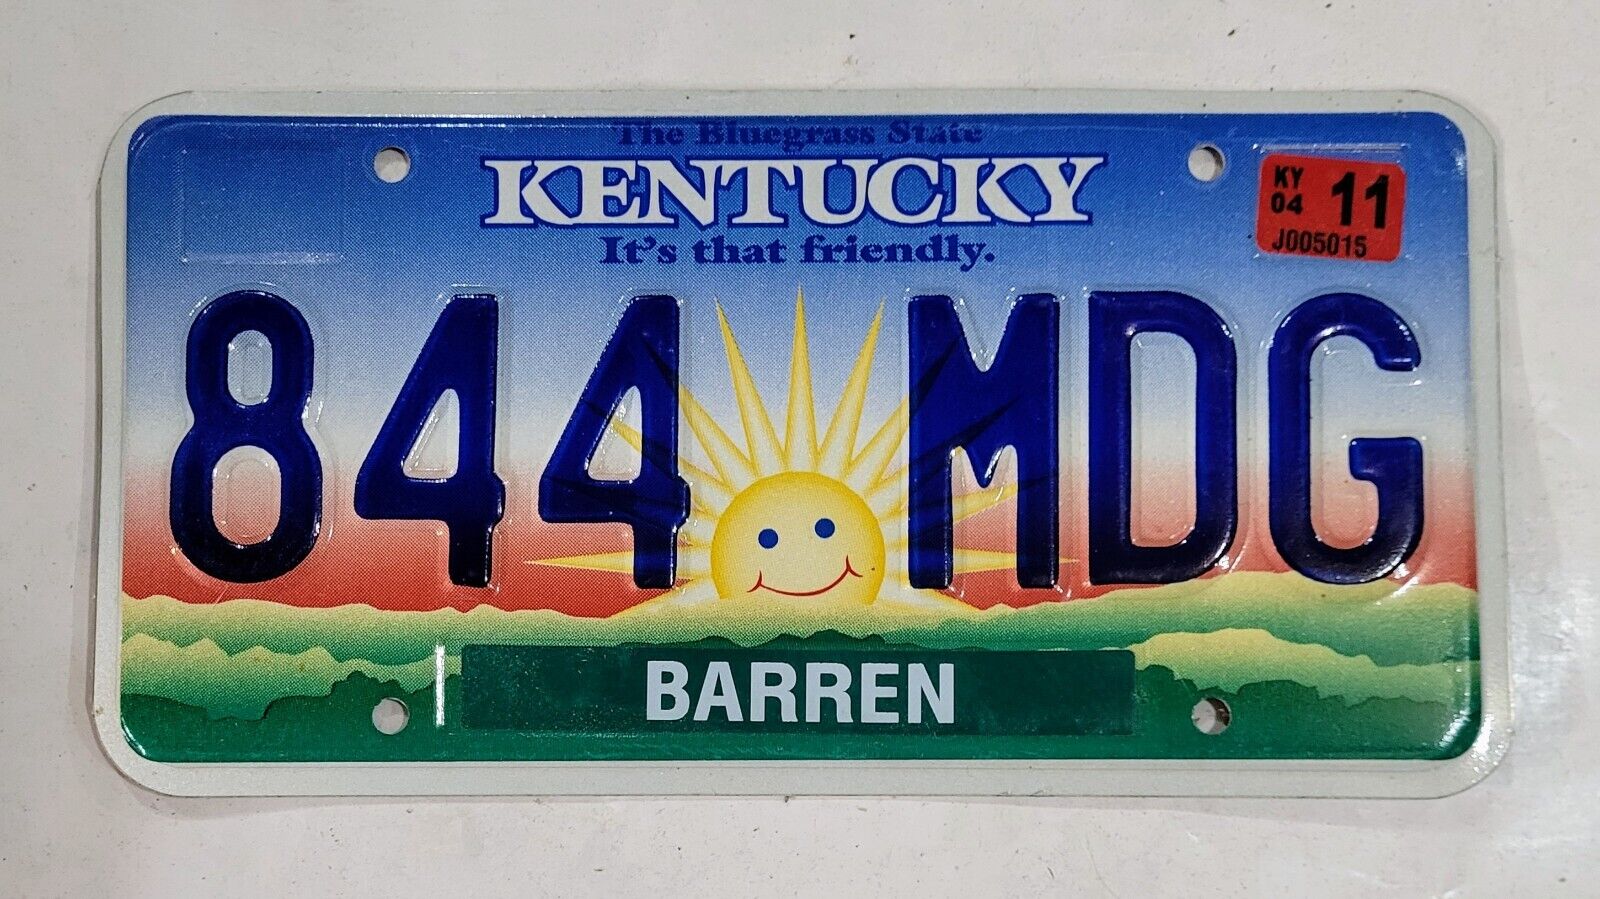 KENTUCKY LICENSE PLATE 🔥FREE SHIPPING🔥 SMILING SUNSHINE GRAPHIC ~ 844 MDG